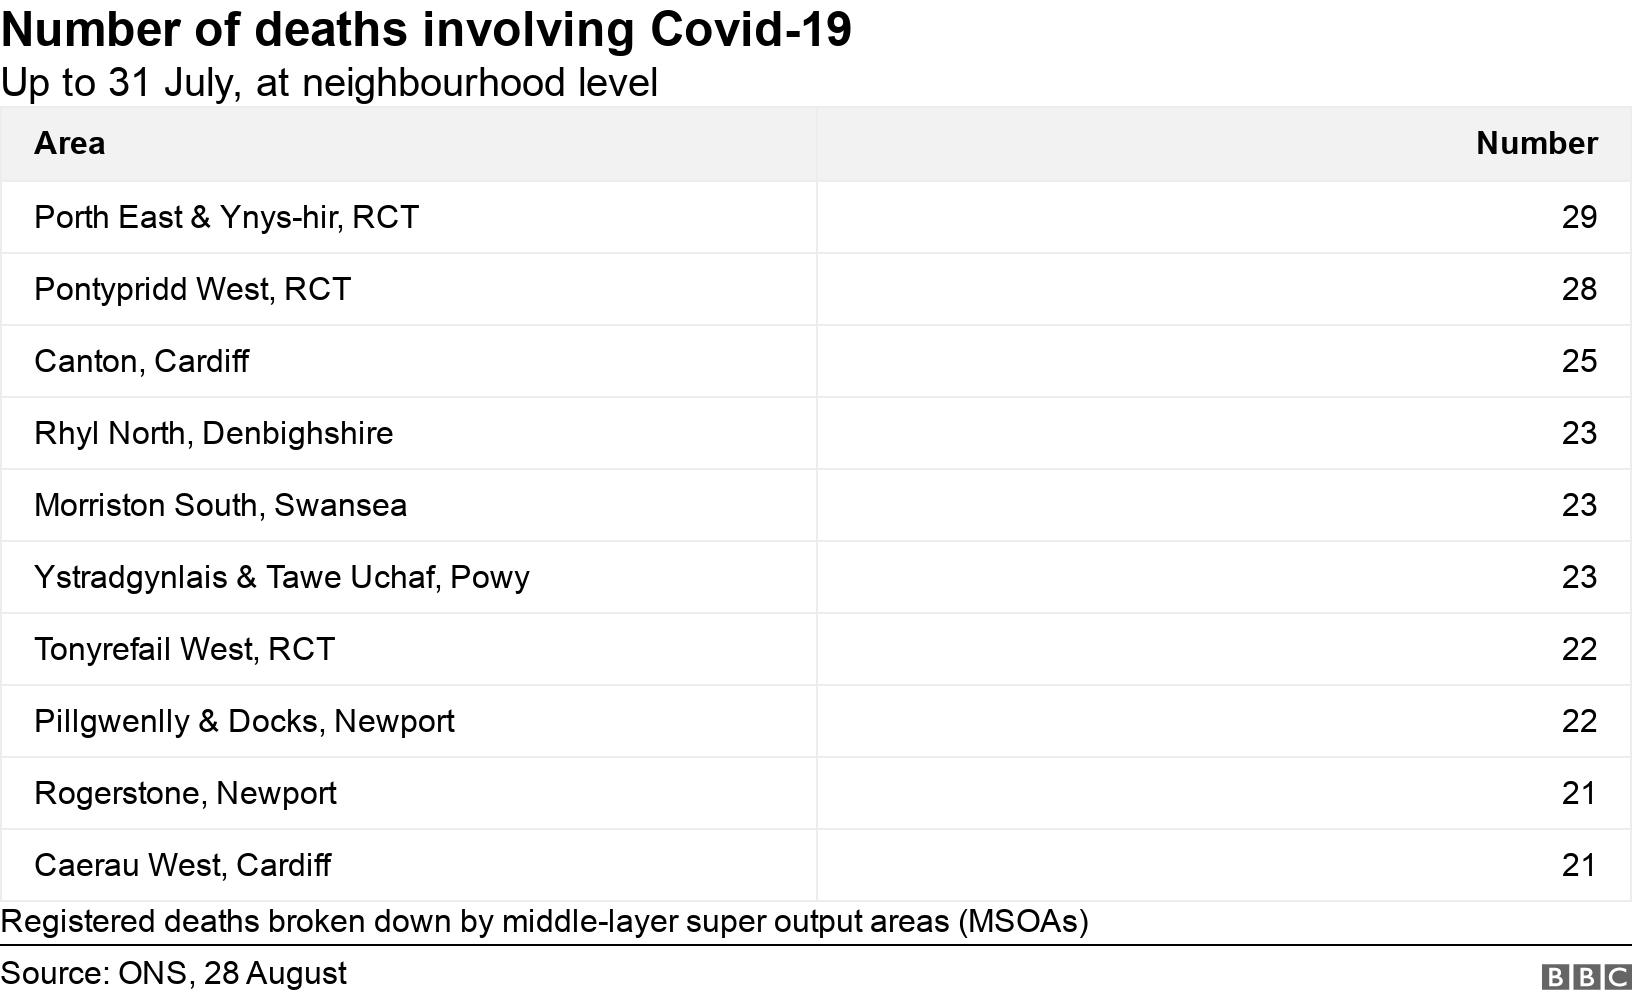 Number of deaths involving Covid-19. Up to 31 July, at neighbourhood level. Registered deaths broken down by middle-layer super output areas (MSOAs).